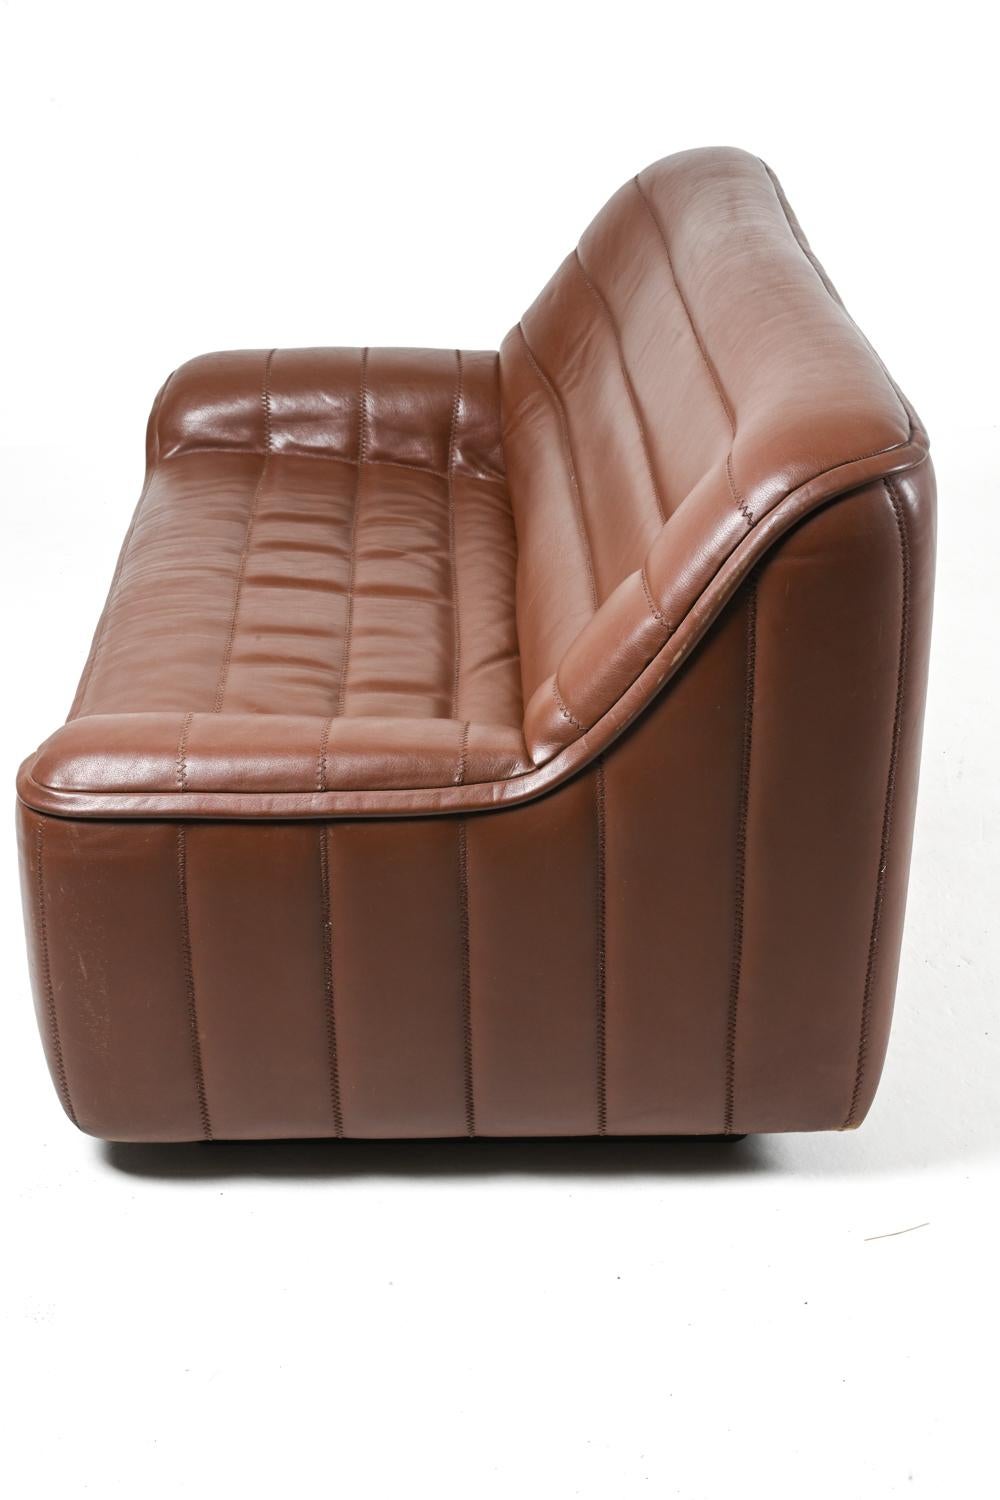 De Sede DS-84 Leather Two-Seat Sofa, c. 1970's For Sale 6